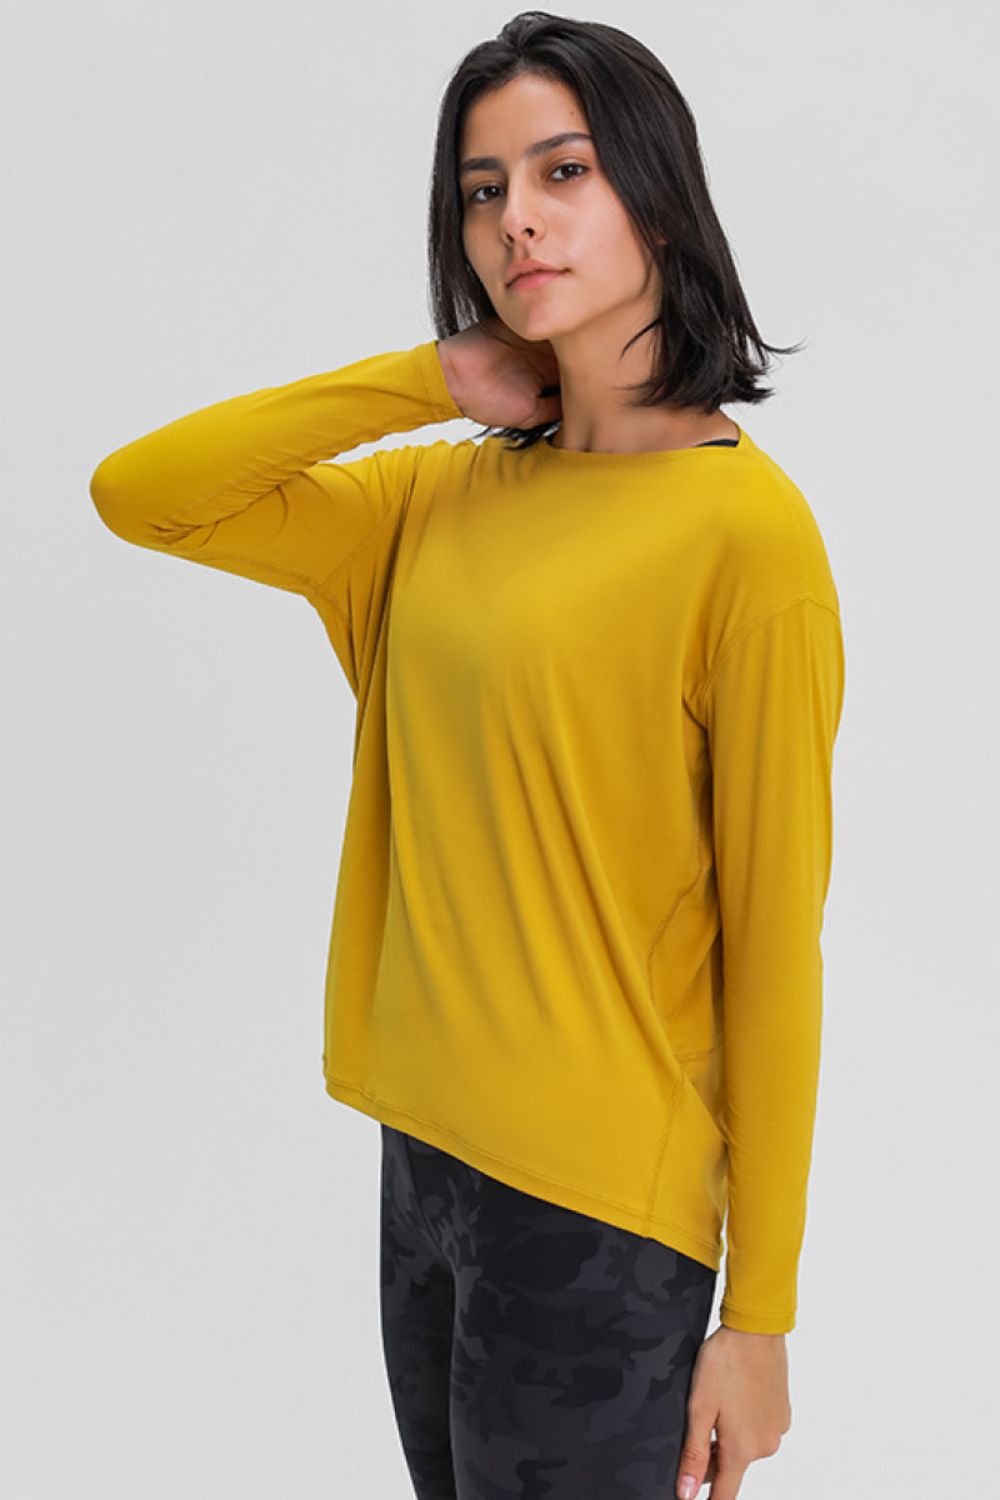 Loose Fit Long Sleeve Active Top